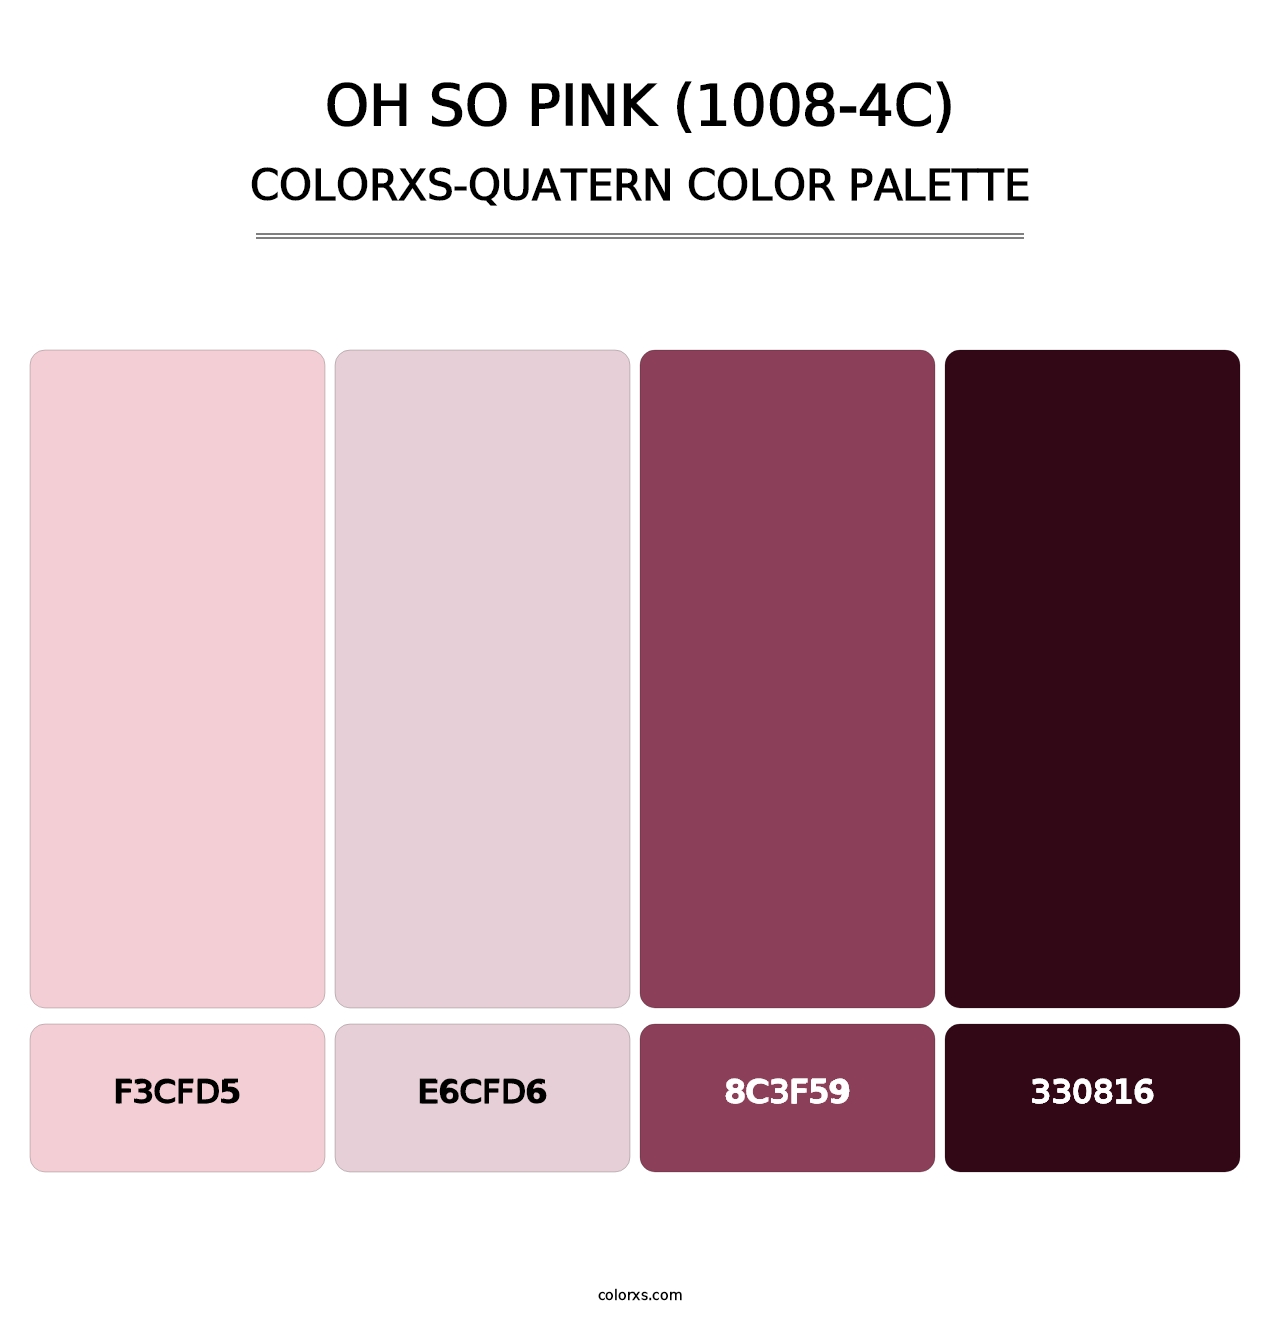 Oh So Pink (1008-4C) - Colorxs Quatern Palette